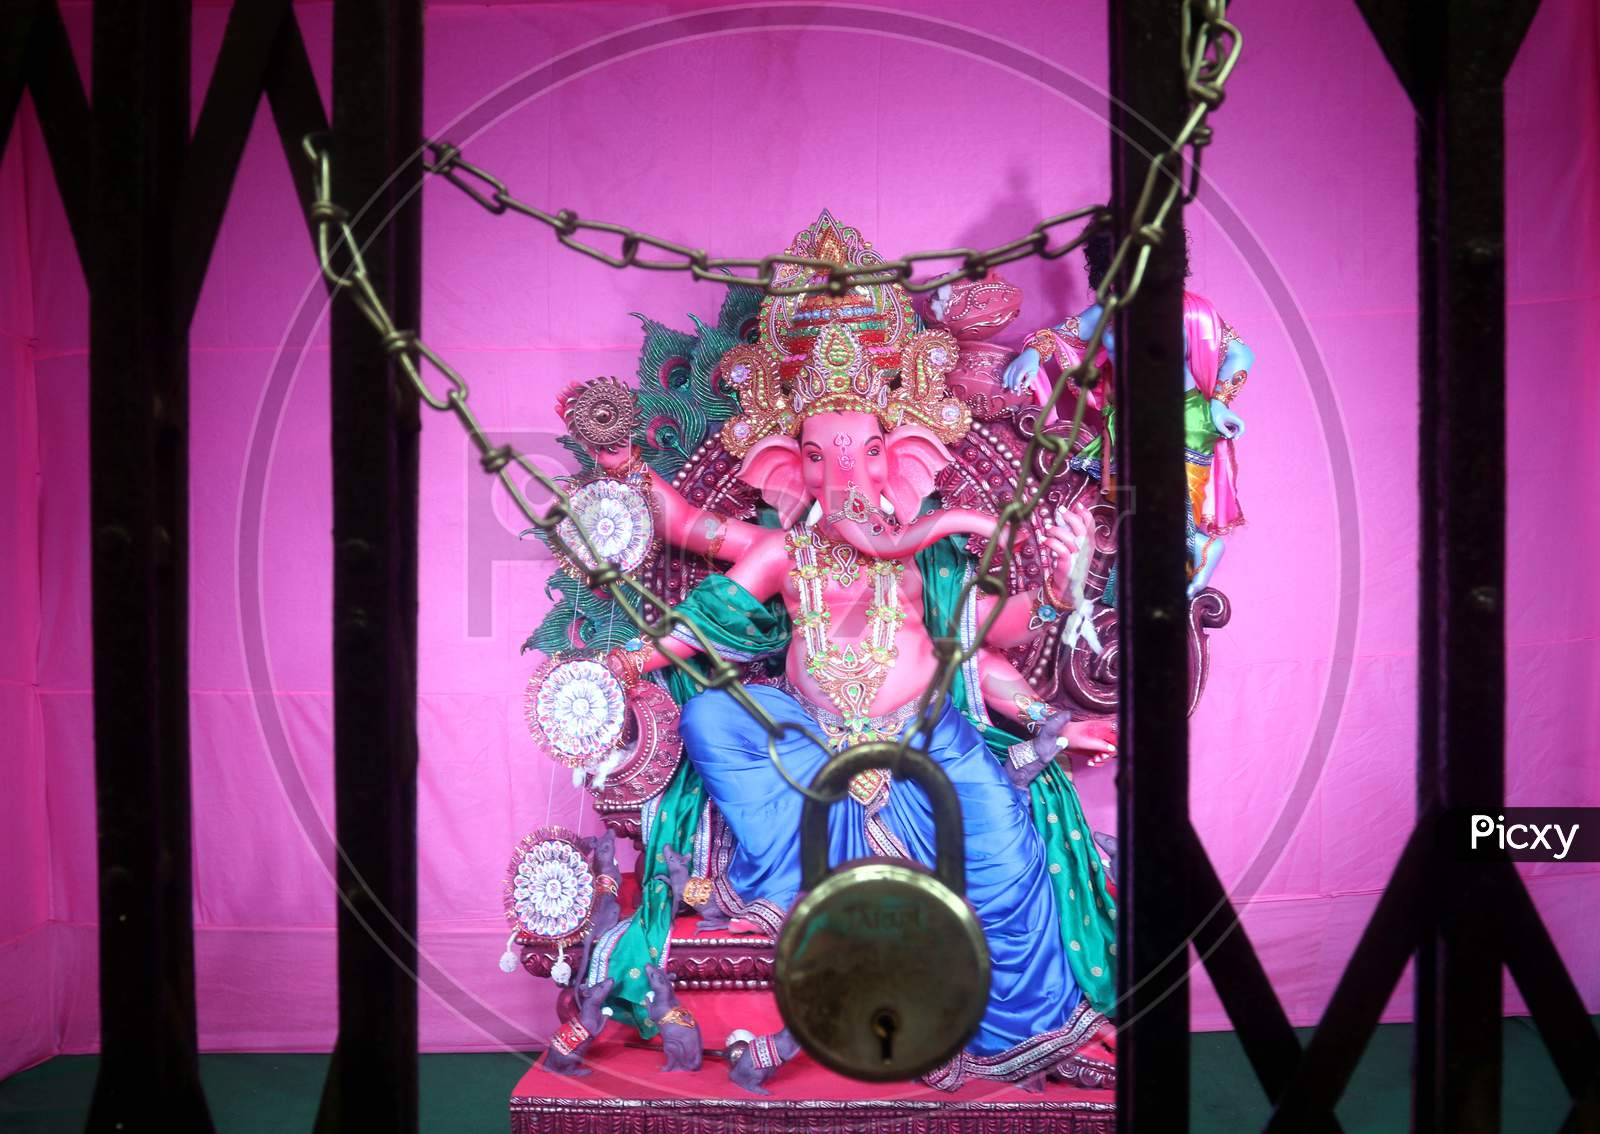 A temple is seen locked ahead of Ganesh Chaturthi festival During The Complete Biweekly Lockdown To Curb  the Covid 19 Spread In Kolkata On August 21, 2020